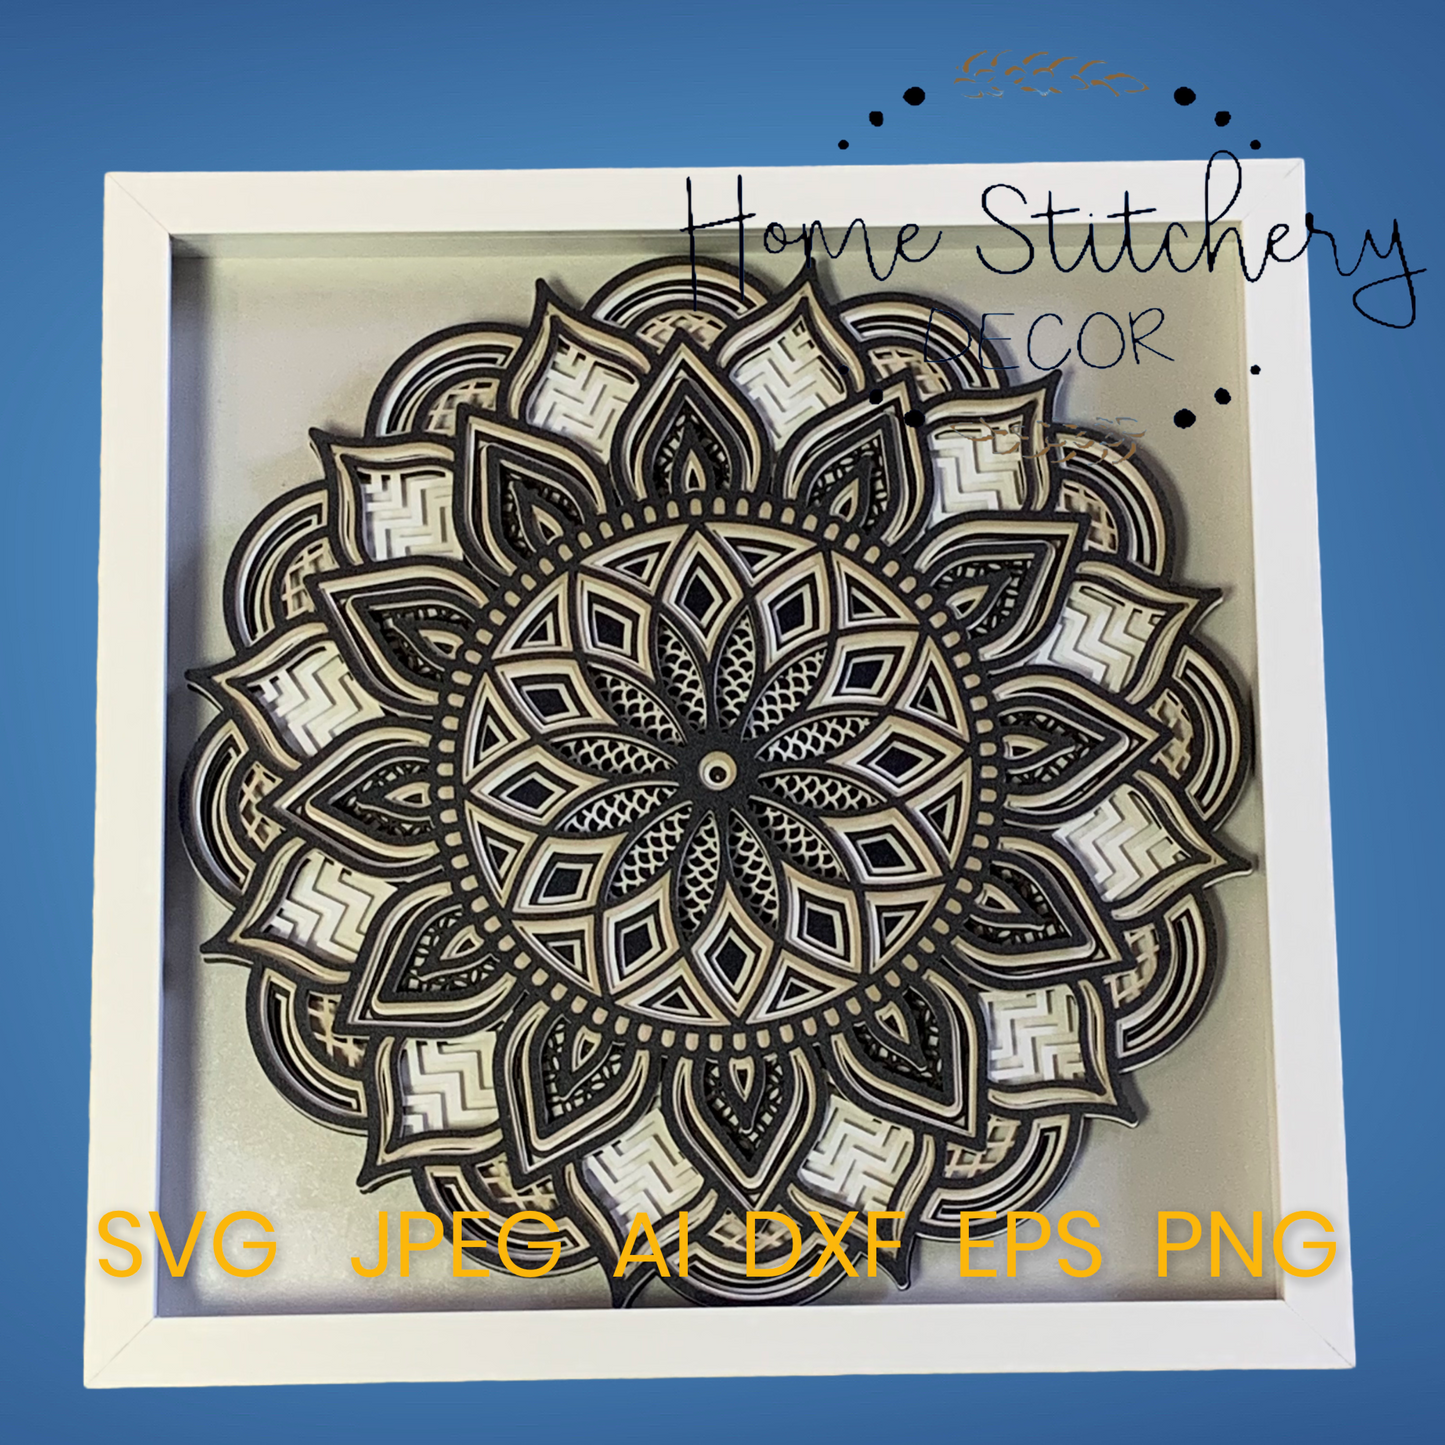 Cricut Mandala Instant Download Pattern to Create your own Mandala Shadow Box Art. Formated for 12 inch shadow boxes.  Check out my YouTube Channel Home Stitchery Decor for complete instructions on how to create your own mesmerizing art.